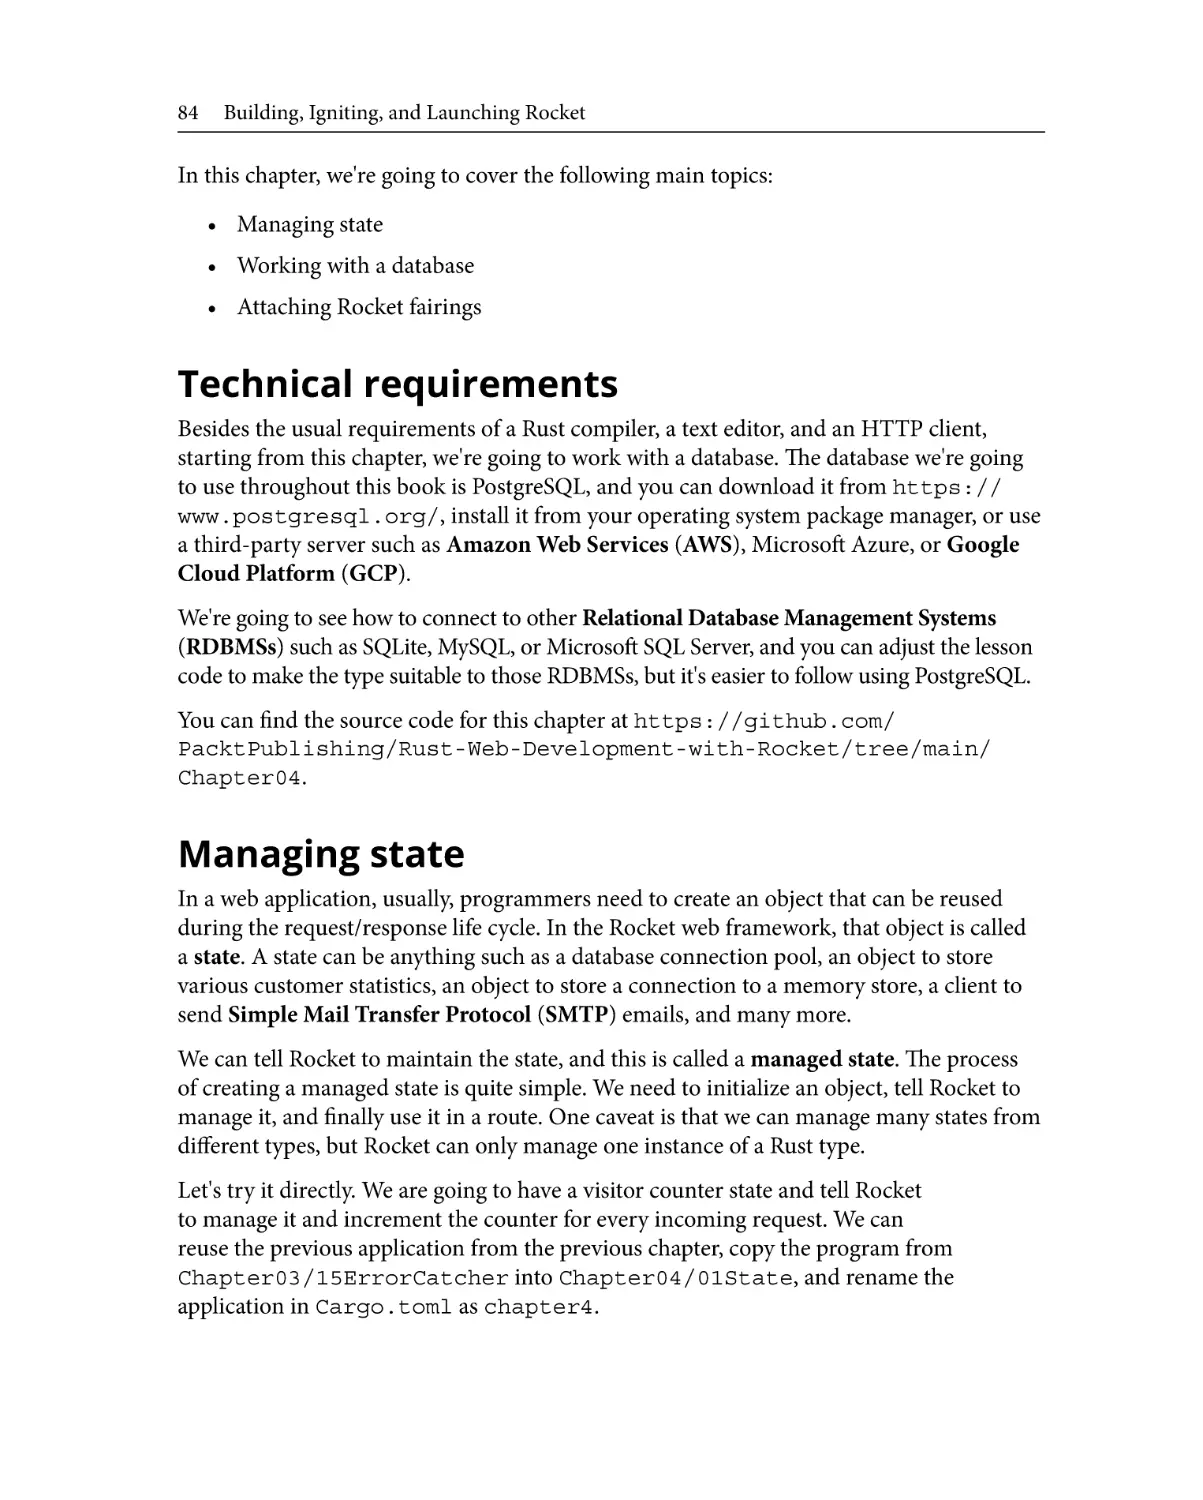 Technical requirements
Managing state